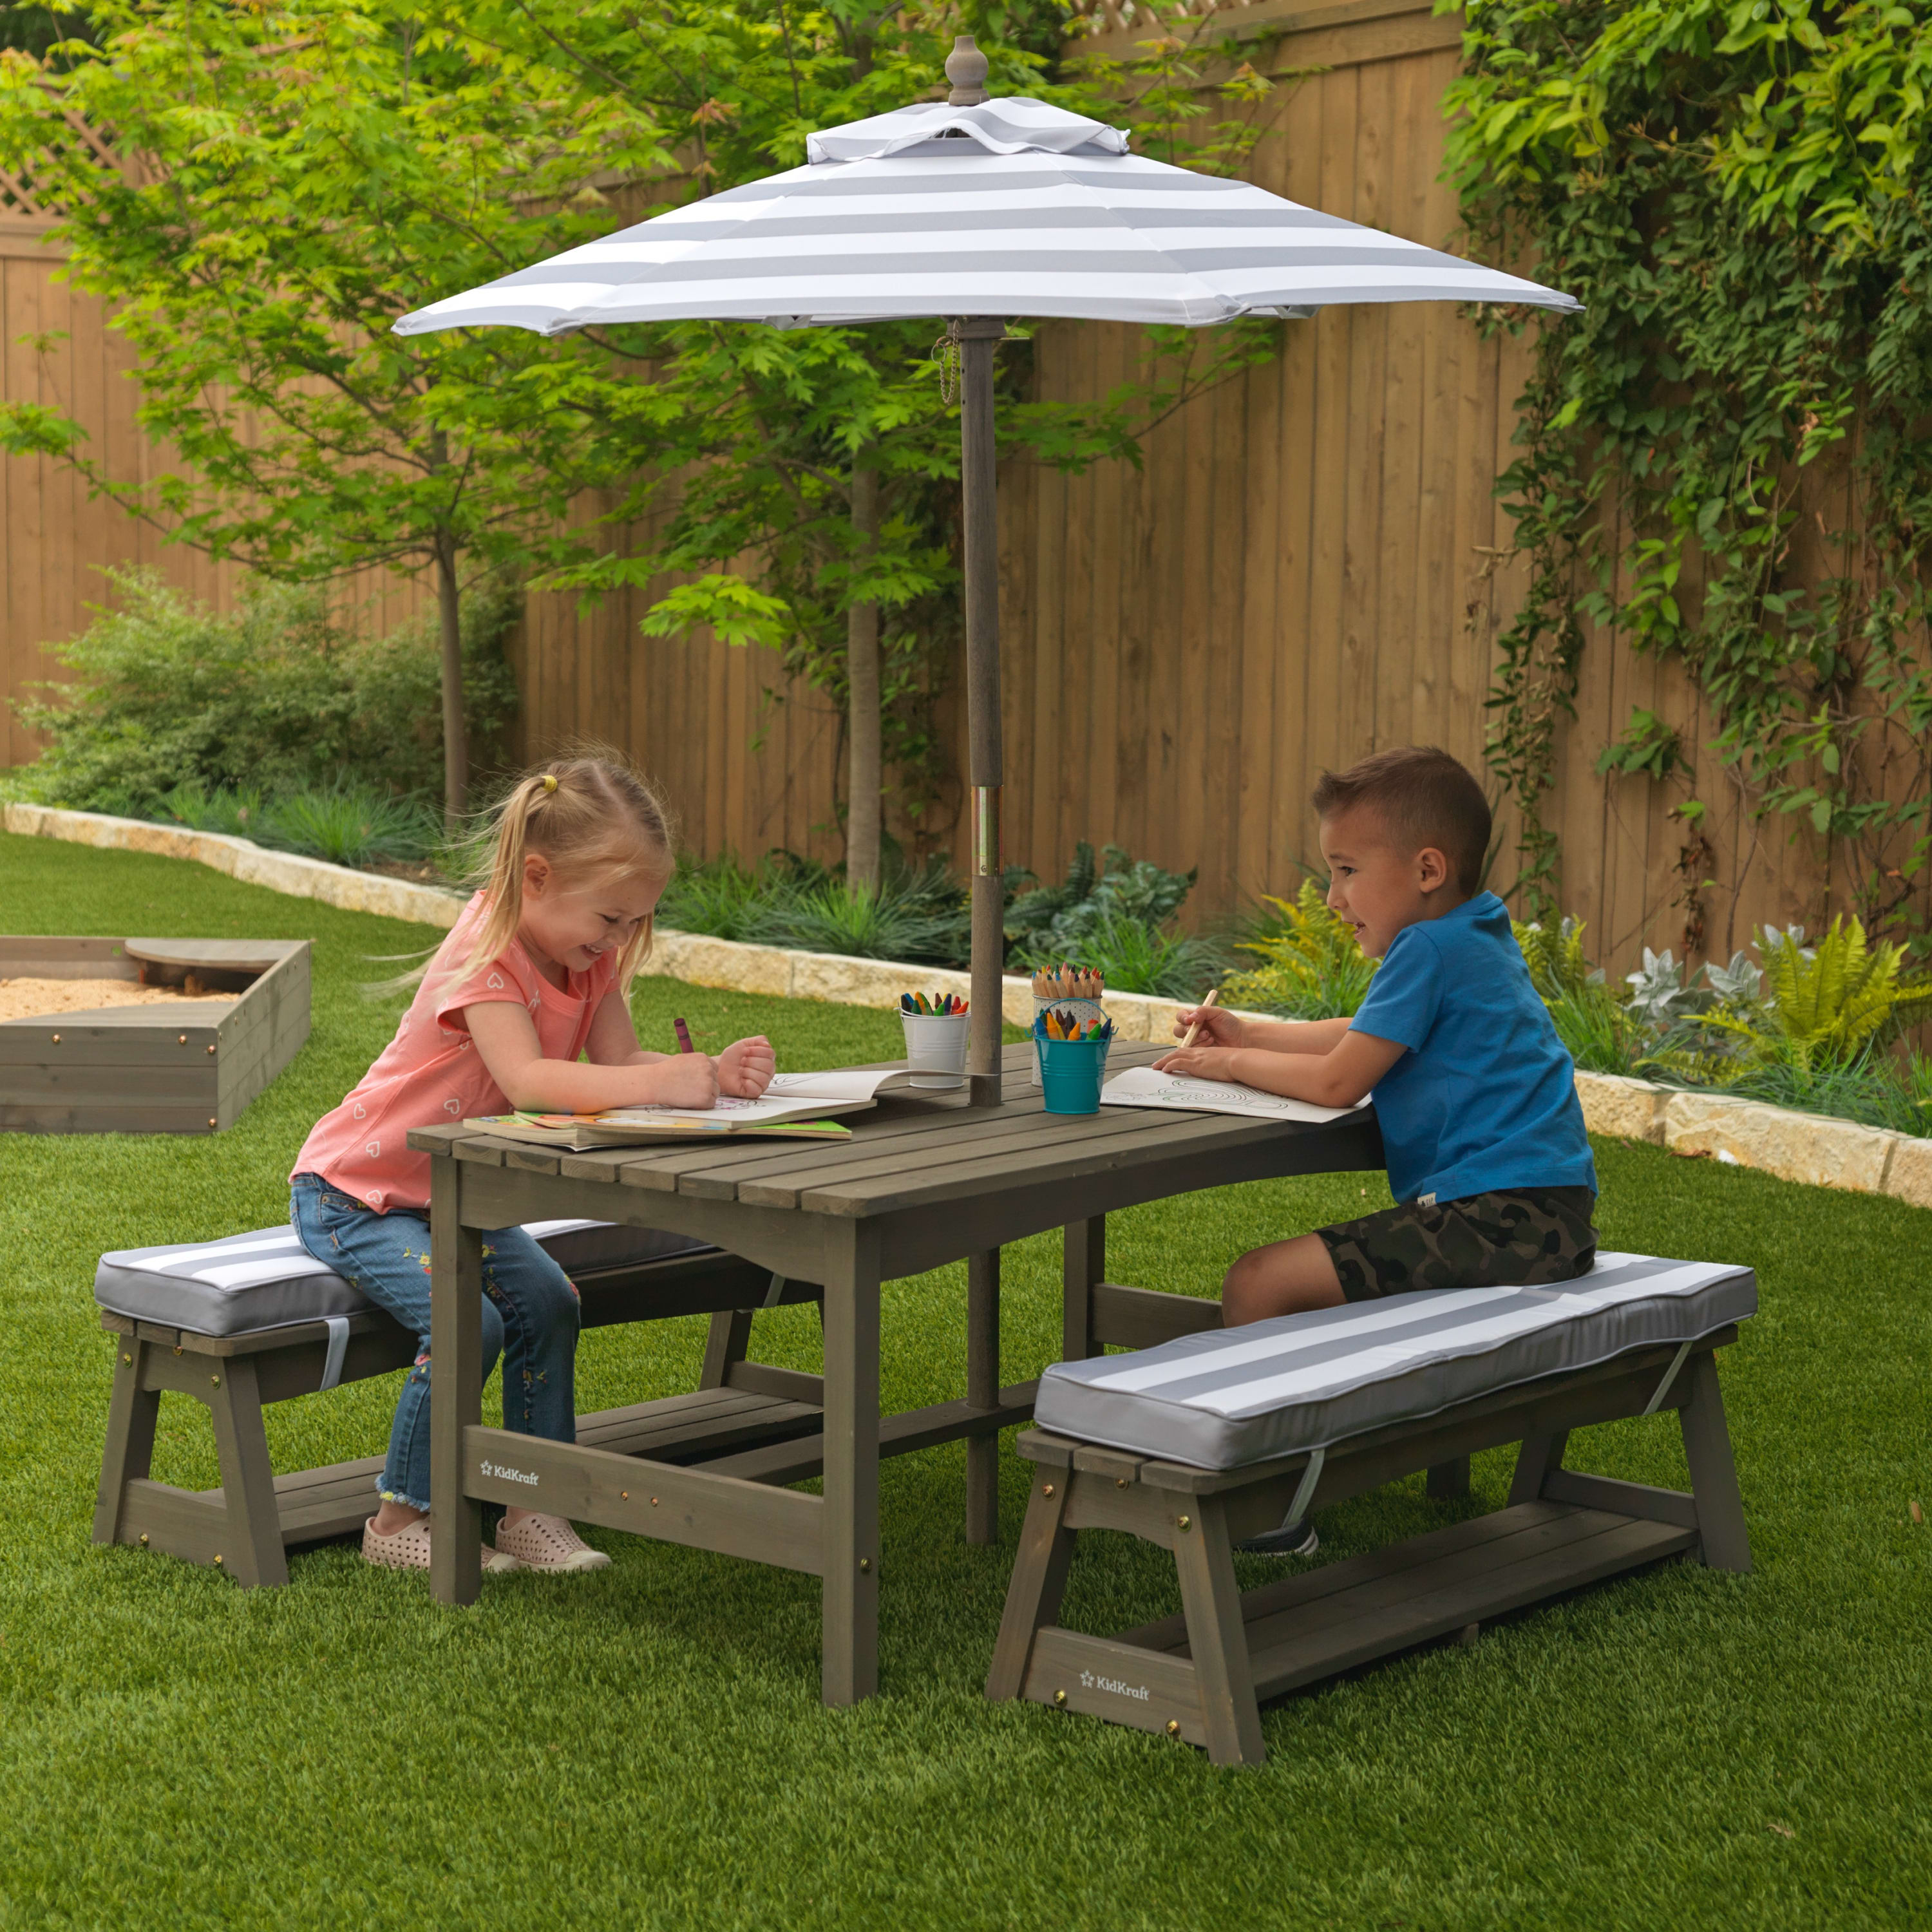 KidKraft Outdoor Table & Bench Set with Cushions and Umbrella, Gray and White Stripes